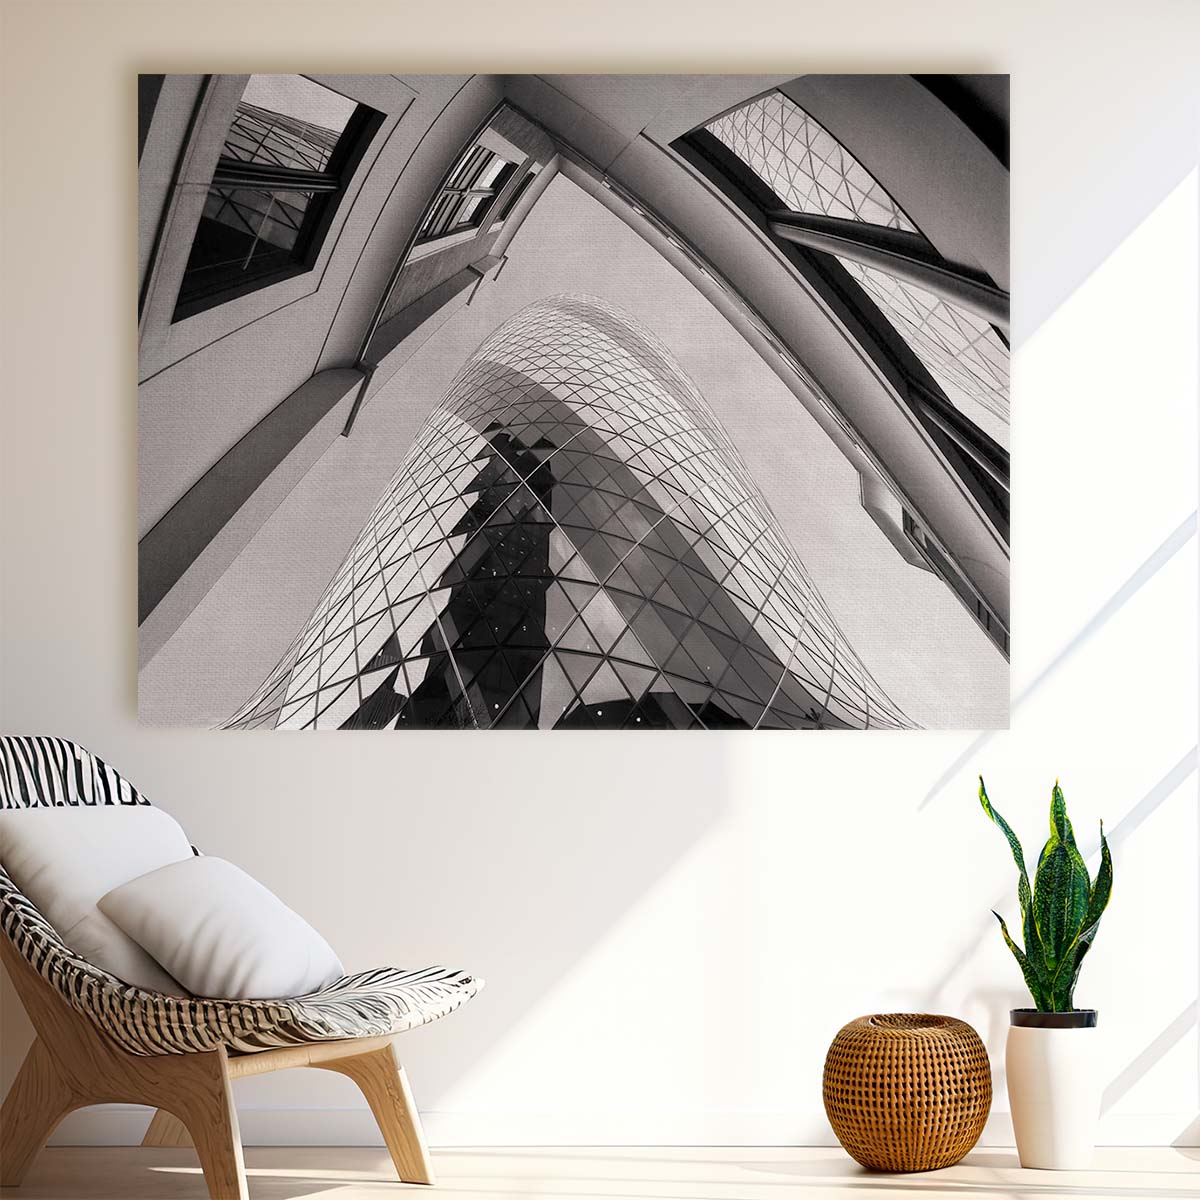 Iconic Gherkin London Skyscraper Monochrome Wall Art by Luxuriance Designs. Made in USA.